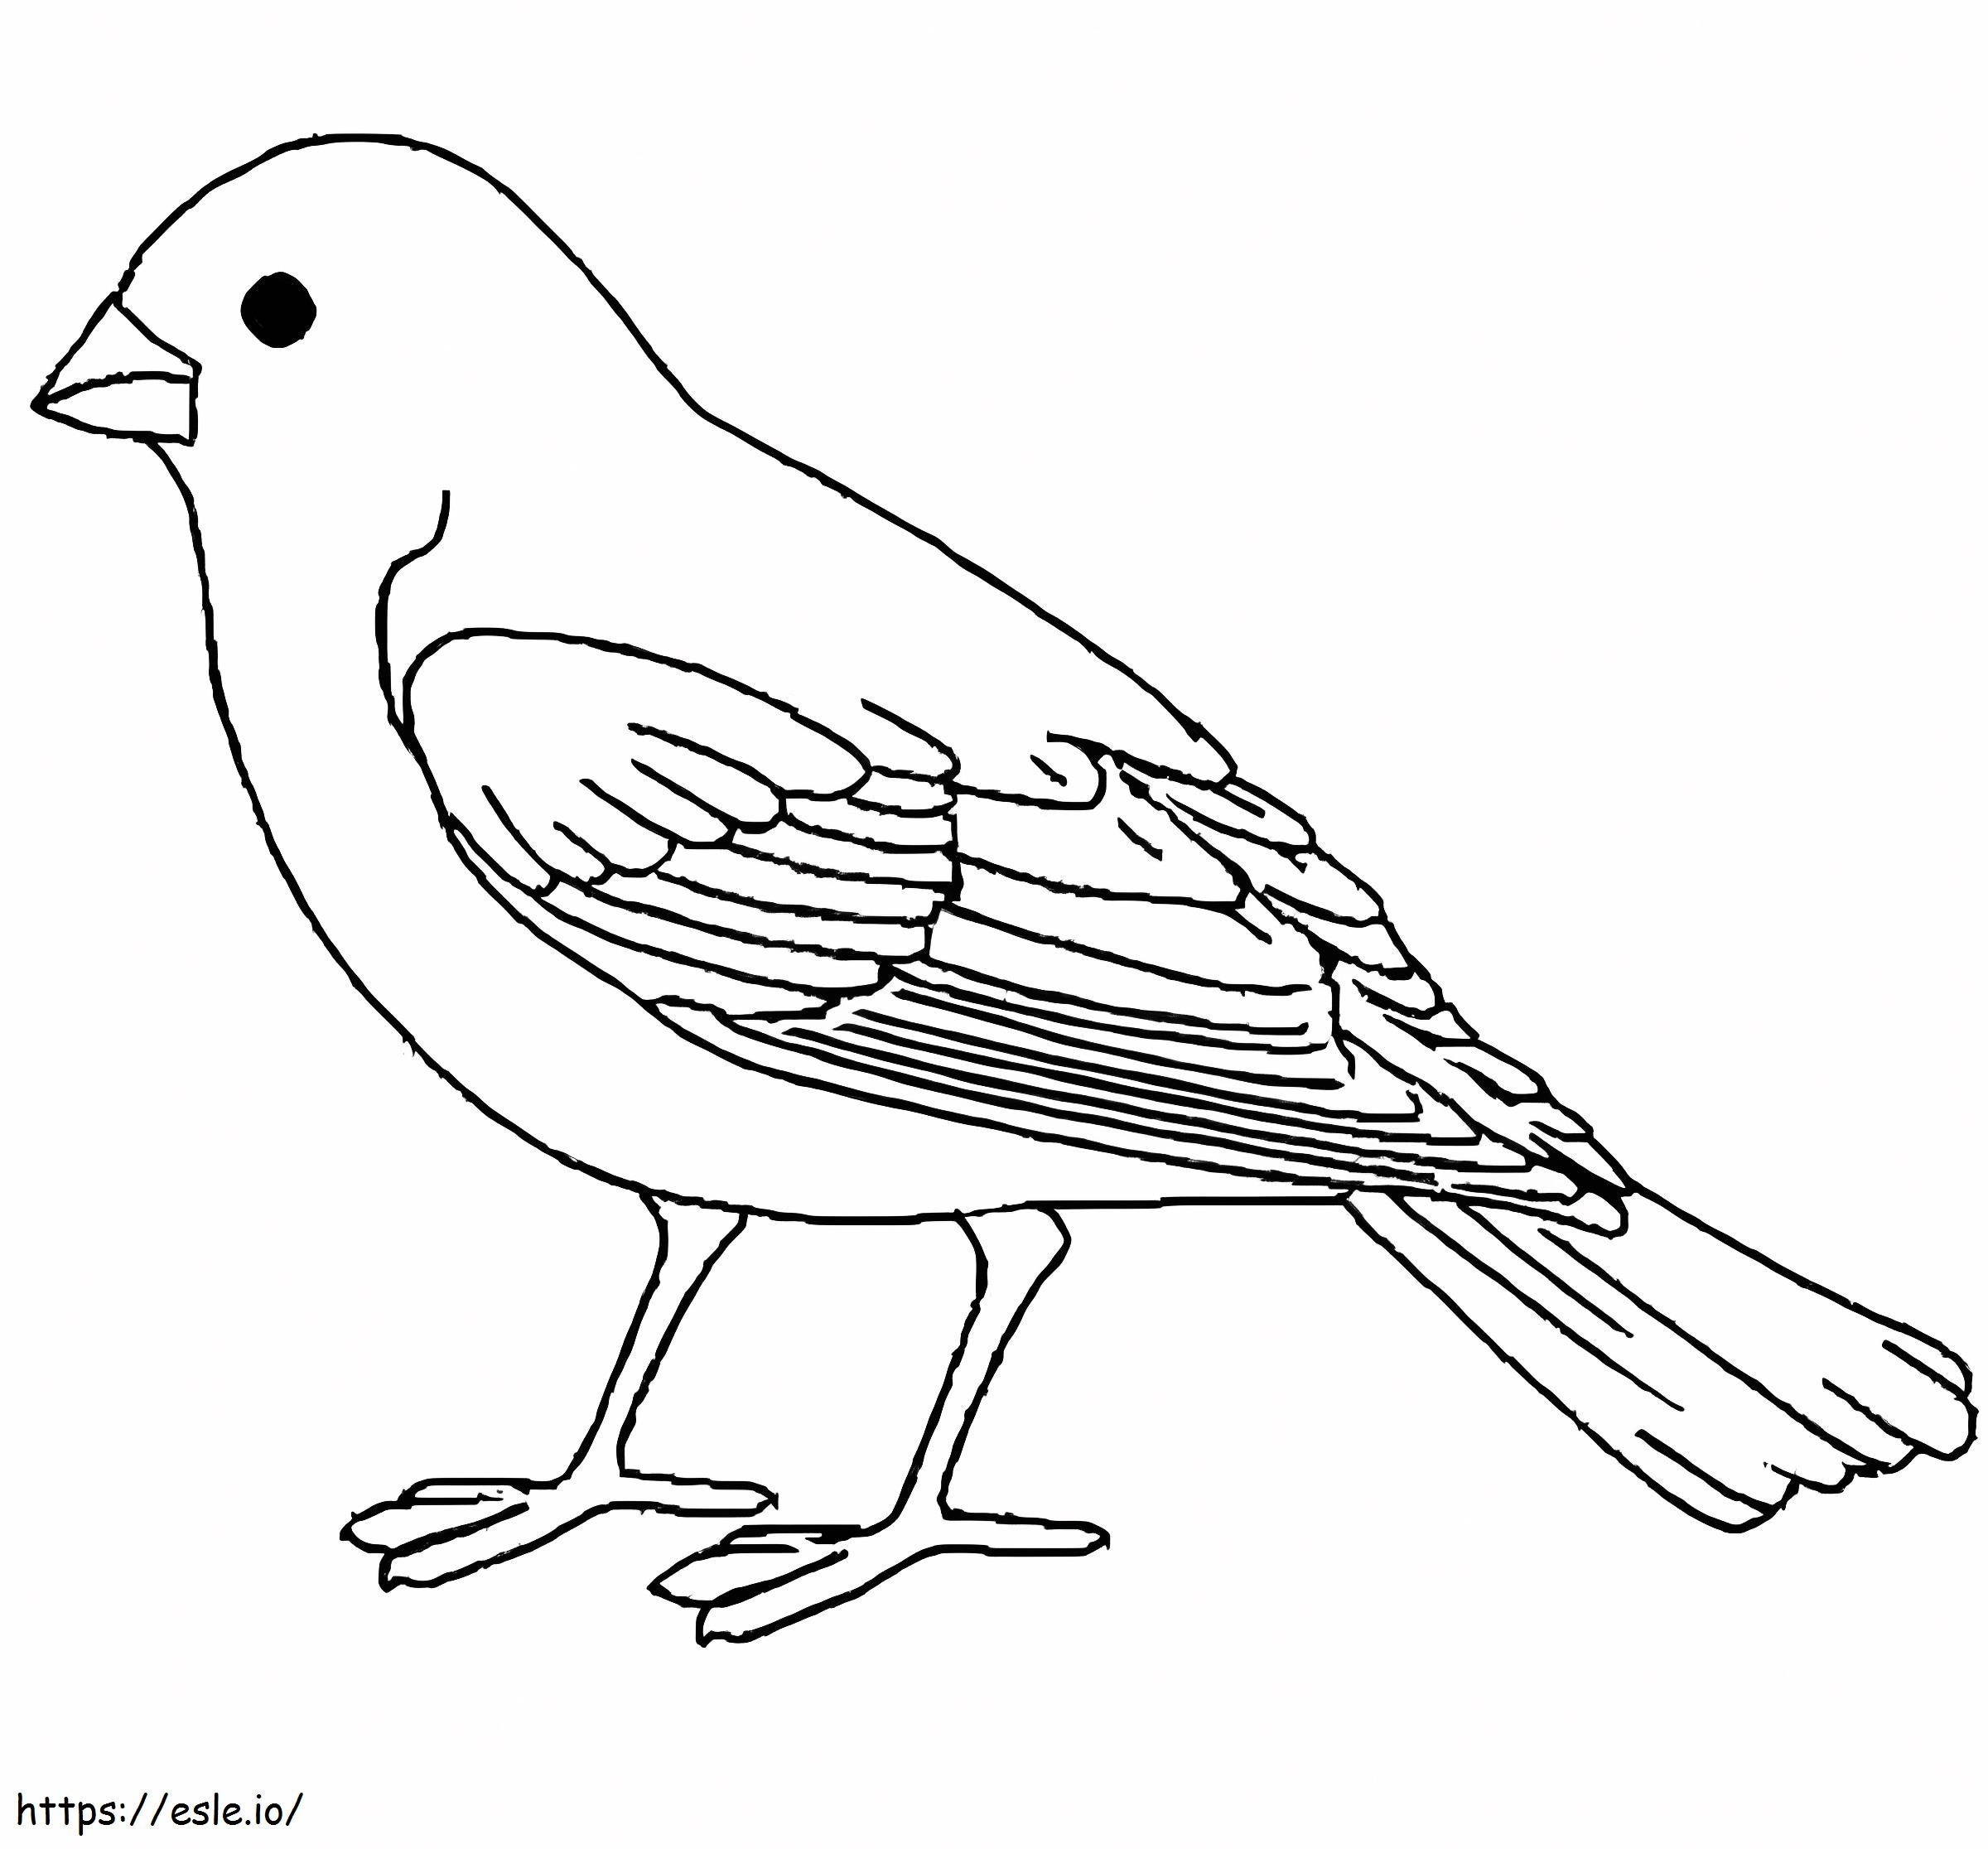 Basic Canary coloring page